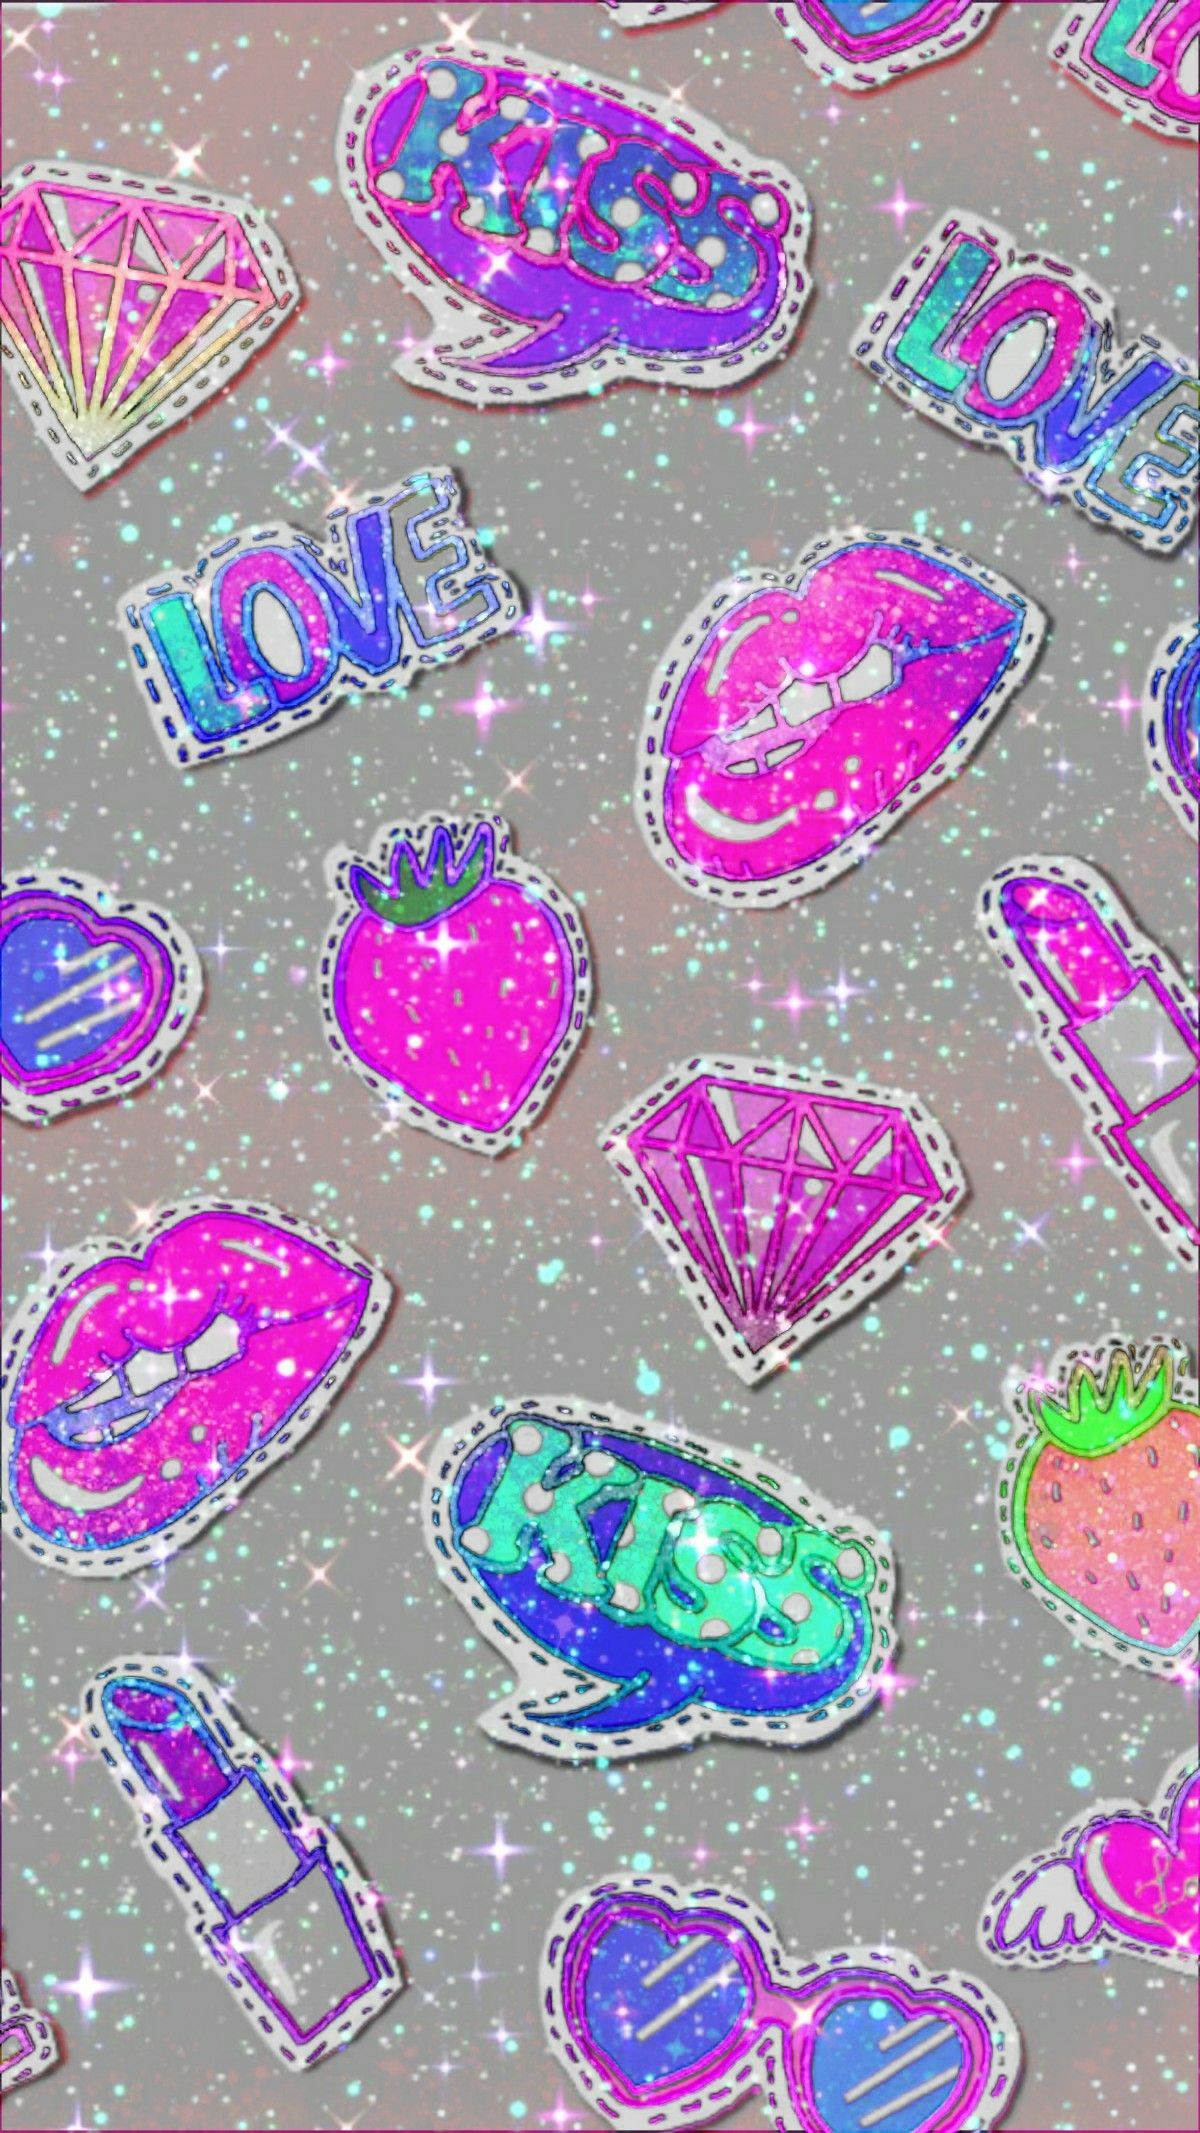 Glitter girl stickersma by me stickers glitter kiss love lips sparkly iphone wallpaper pink wallpaper girly bling wallpaper